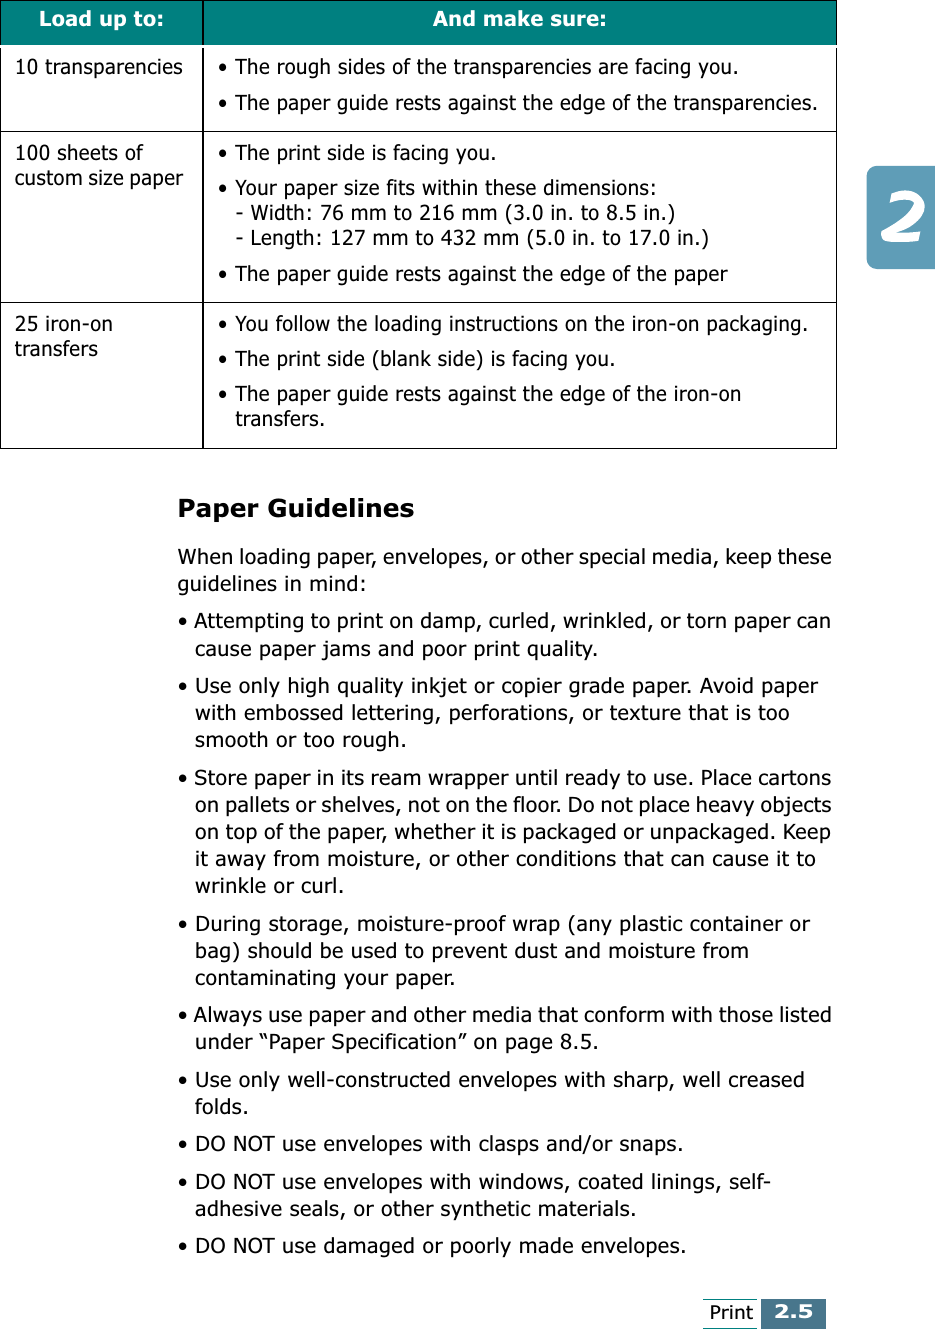 2.5PrintPaper GuidelinesWhen loading paper, envelopes, or other special media, keep these guidelines in mind:• Attempting to print on damp, curled, wrinkled, or torn paper can cause paper jams and poor print quality.• Use only high quality inkjet or copier grade paper. Avoid paper with embossed lettering, perforations, or texture that is too smooth or too rough.• Store paper in its ream wrapper until ready to use. Place cartons on pallets or shelves, not on the floor. Do not place heavy objects on top of the paper, whether it is packaged or unpackaged. Keep it away from moisture, or other conditions that can cause it to wrinkle or curl.• During storage, moisture-proof wrap (any plastic container or bag) should be used to prevent dust and moisture from contaminating your paper.• Always use paper and other media that conform with those listed under “Paper Specification” on page 8.5.• Use only well-constructed envelopes with sharp, well creased folds.• DO NOT use envelopes with clasps and/or snaps.• DO NOT use envelopes with windows, coated linings, self-adhesive seals, or other synthetic materials.• DO NOT use damaged or poorly made envelopes.10 transparencies • The rough sides of the transparencies are facing you.• The paper guide rests against the edge of the transparencies.100 sheets of custom size paper  • The print side is facing you.• Your paper size fits within these dimensions:- Width: 76 mm to 216 mm (3.0 in. to 8.5 in.)- Length: 127 mm to 432 mm (5.0 in. to 17.0 in.)• The paper guide rests against the edge of the paper25 iron-on transfers • You follow the loading instructions on the iron-on packaging.• The print side (blank side) is facing you.• The paper guide rests against the edge of the iron-on transfers.Load up to: And make sure: